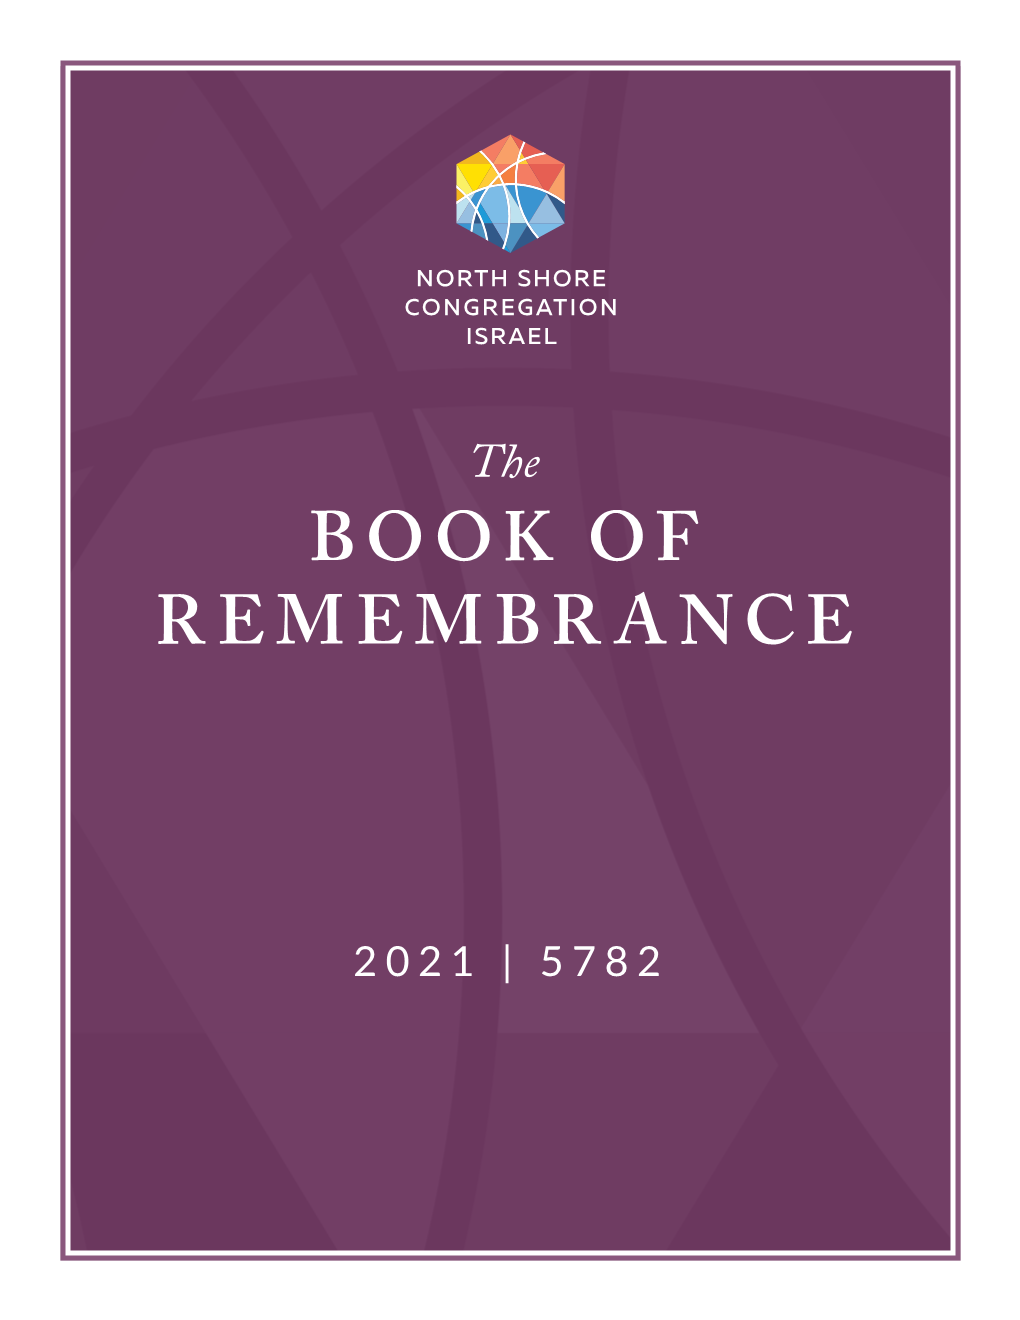 NSCI Book of Remembrance 0821 REV5.Indd